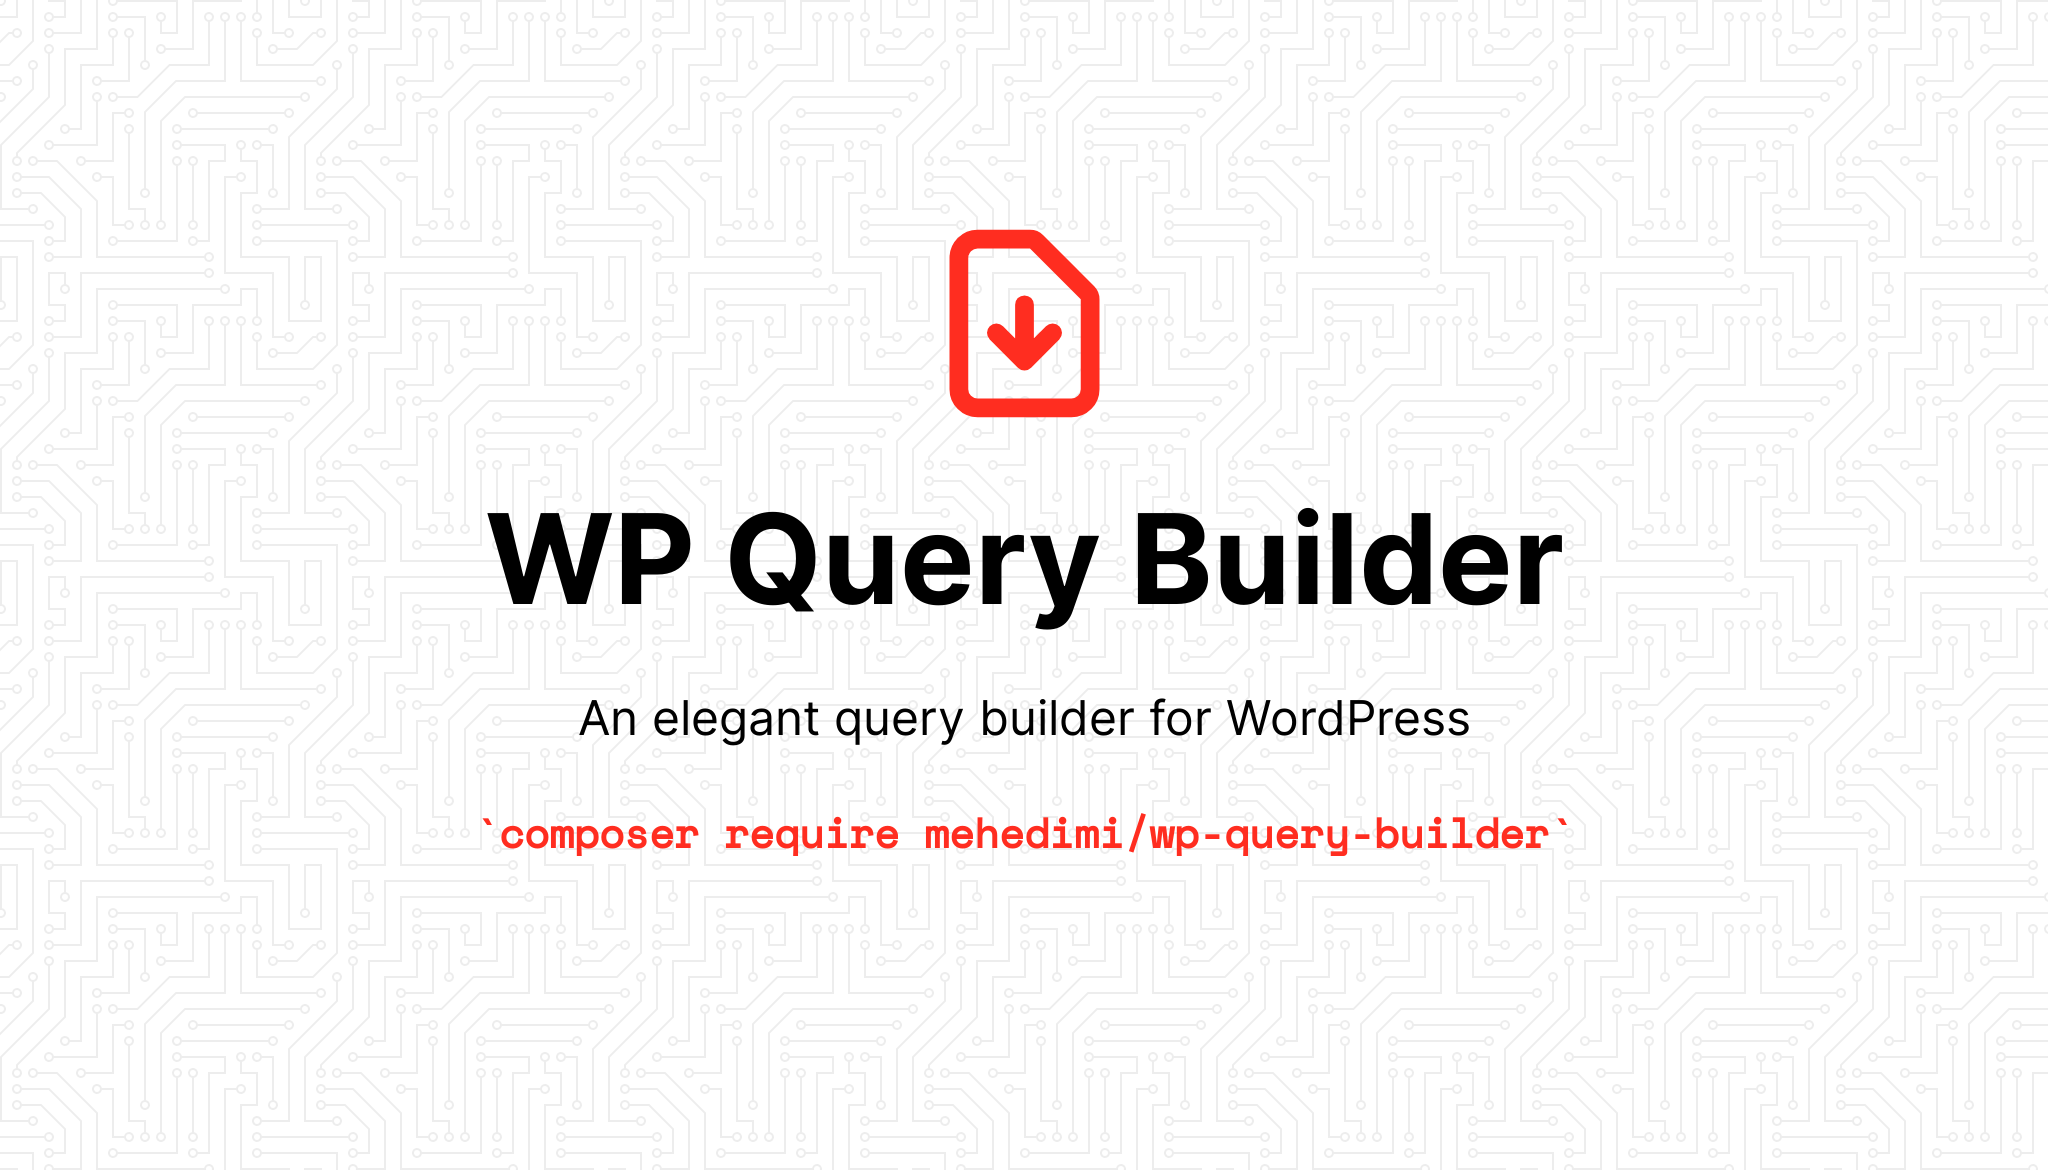 WP Query Builder